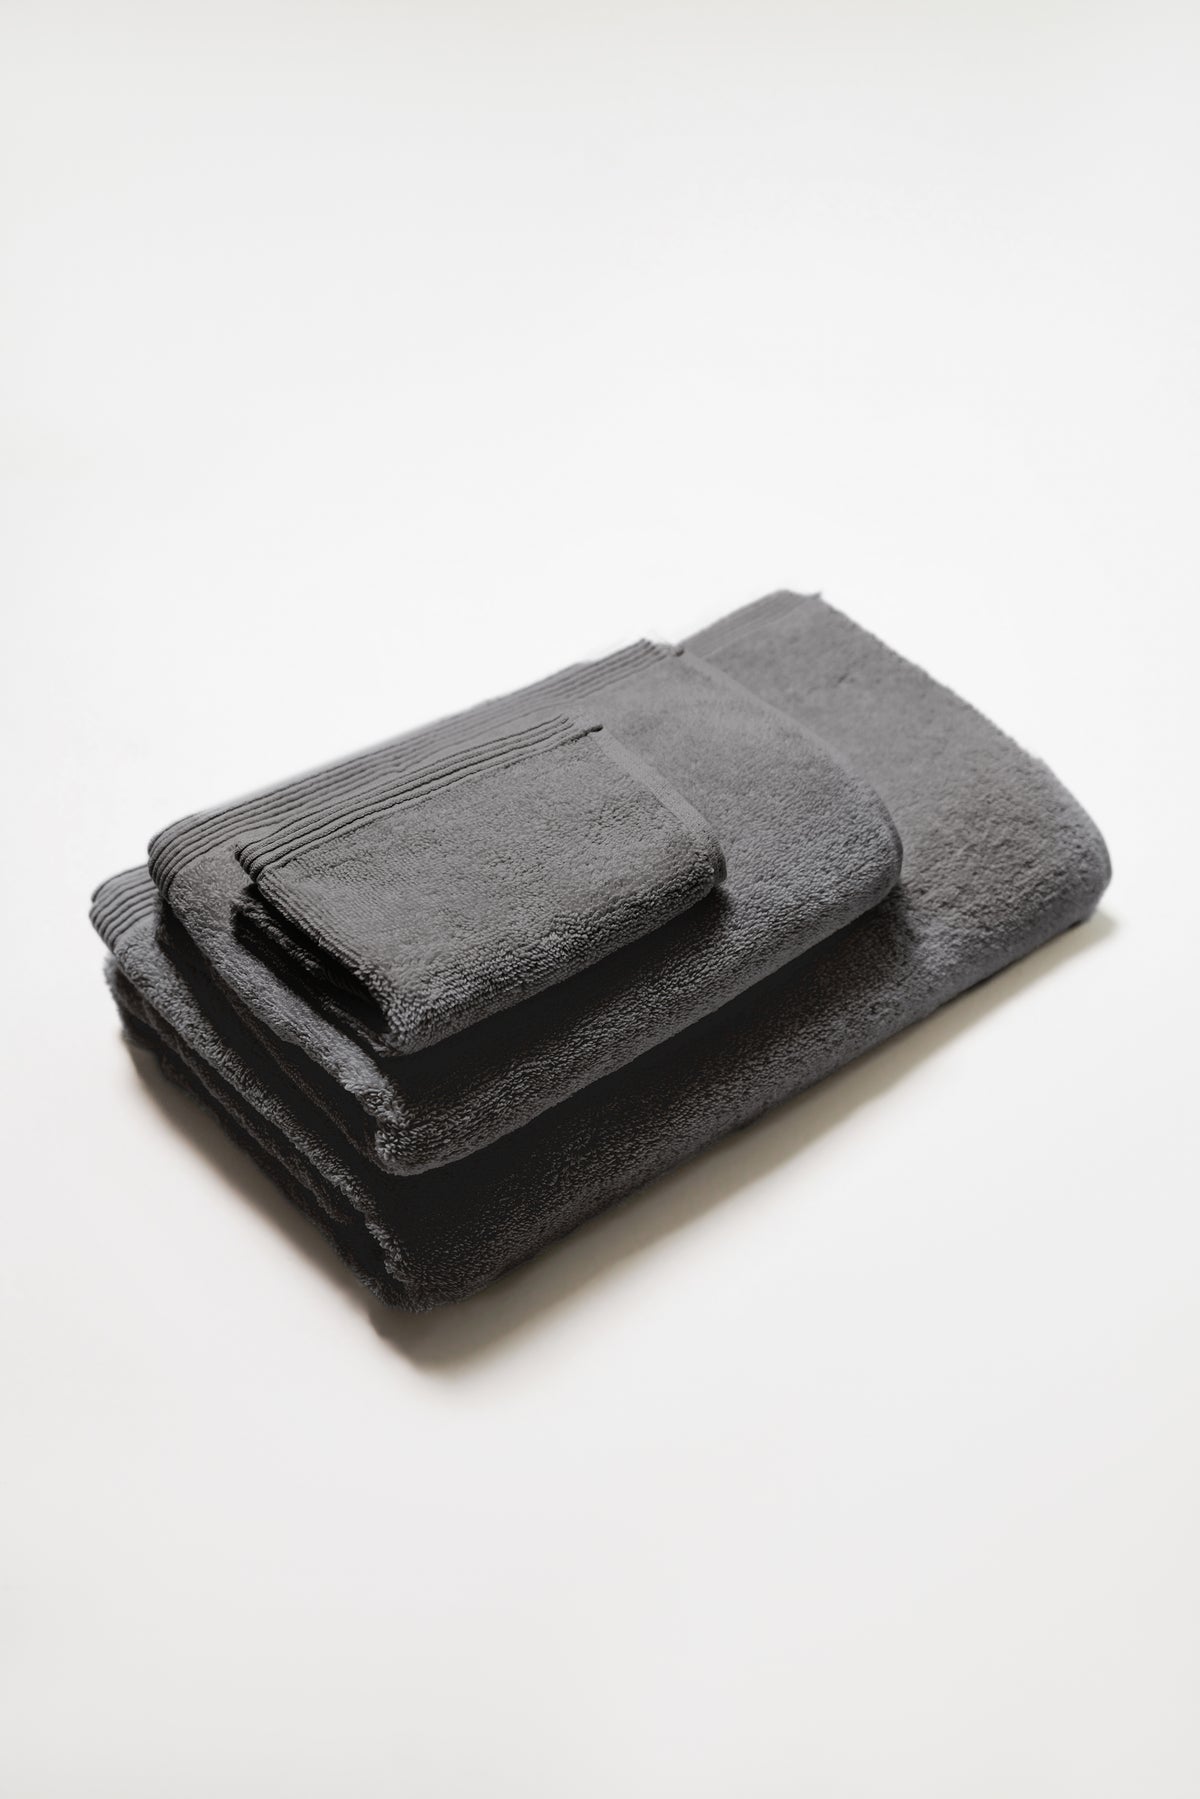 Seine, Bordered Cotton Face Cloth in Charcoal